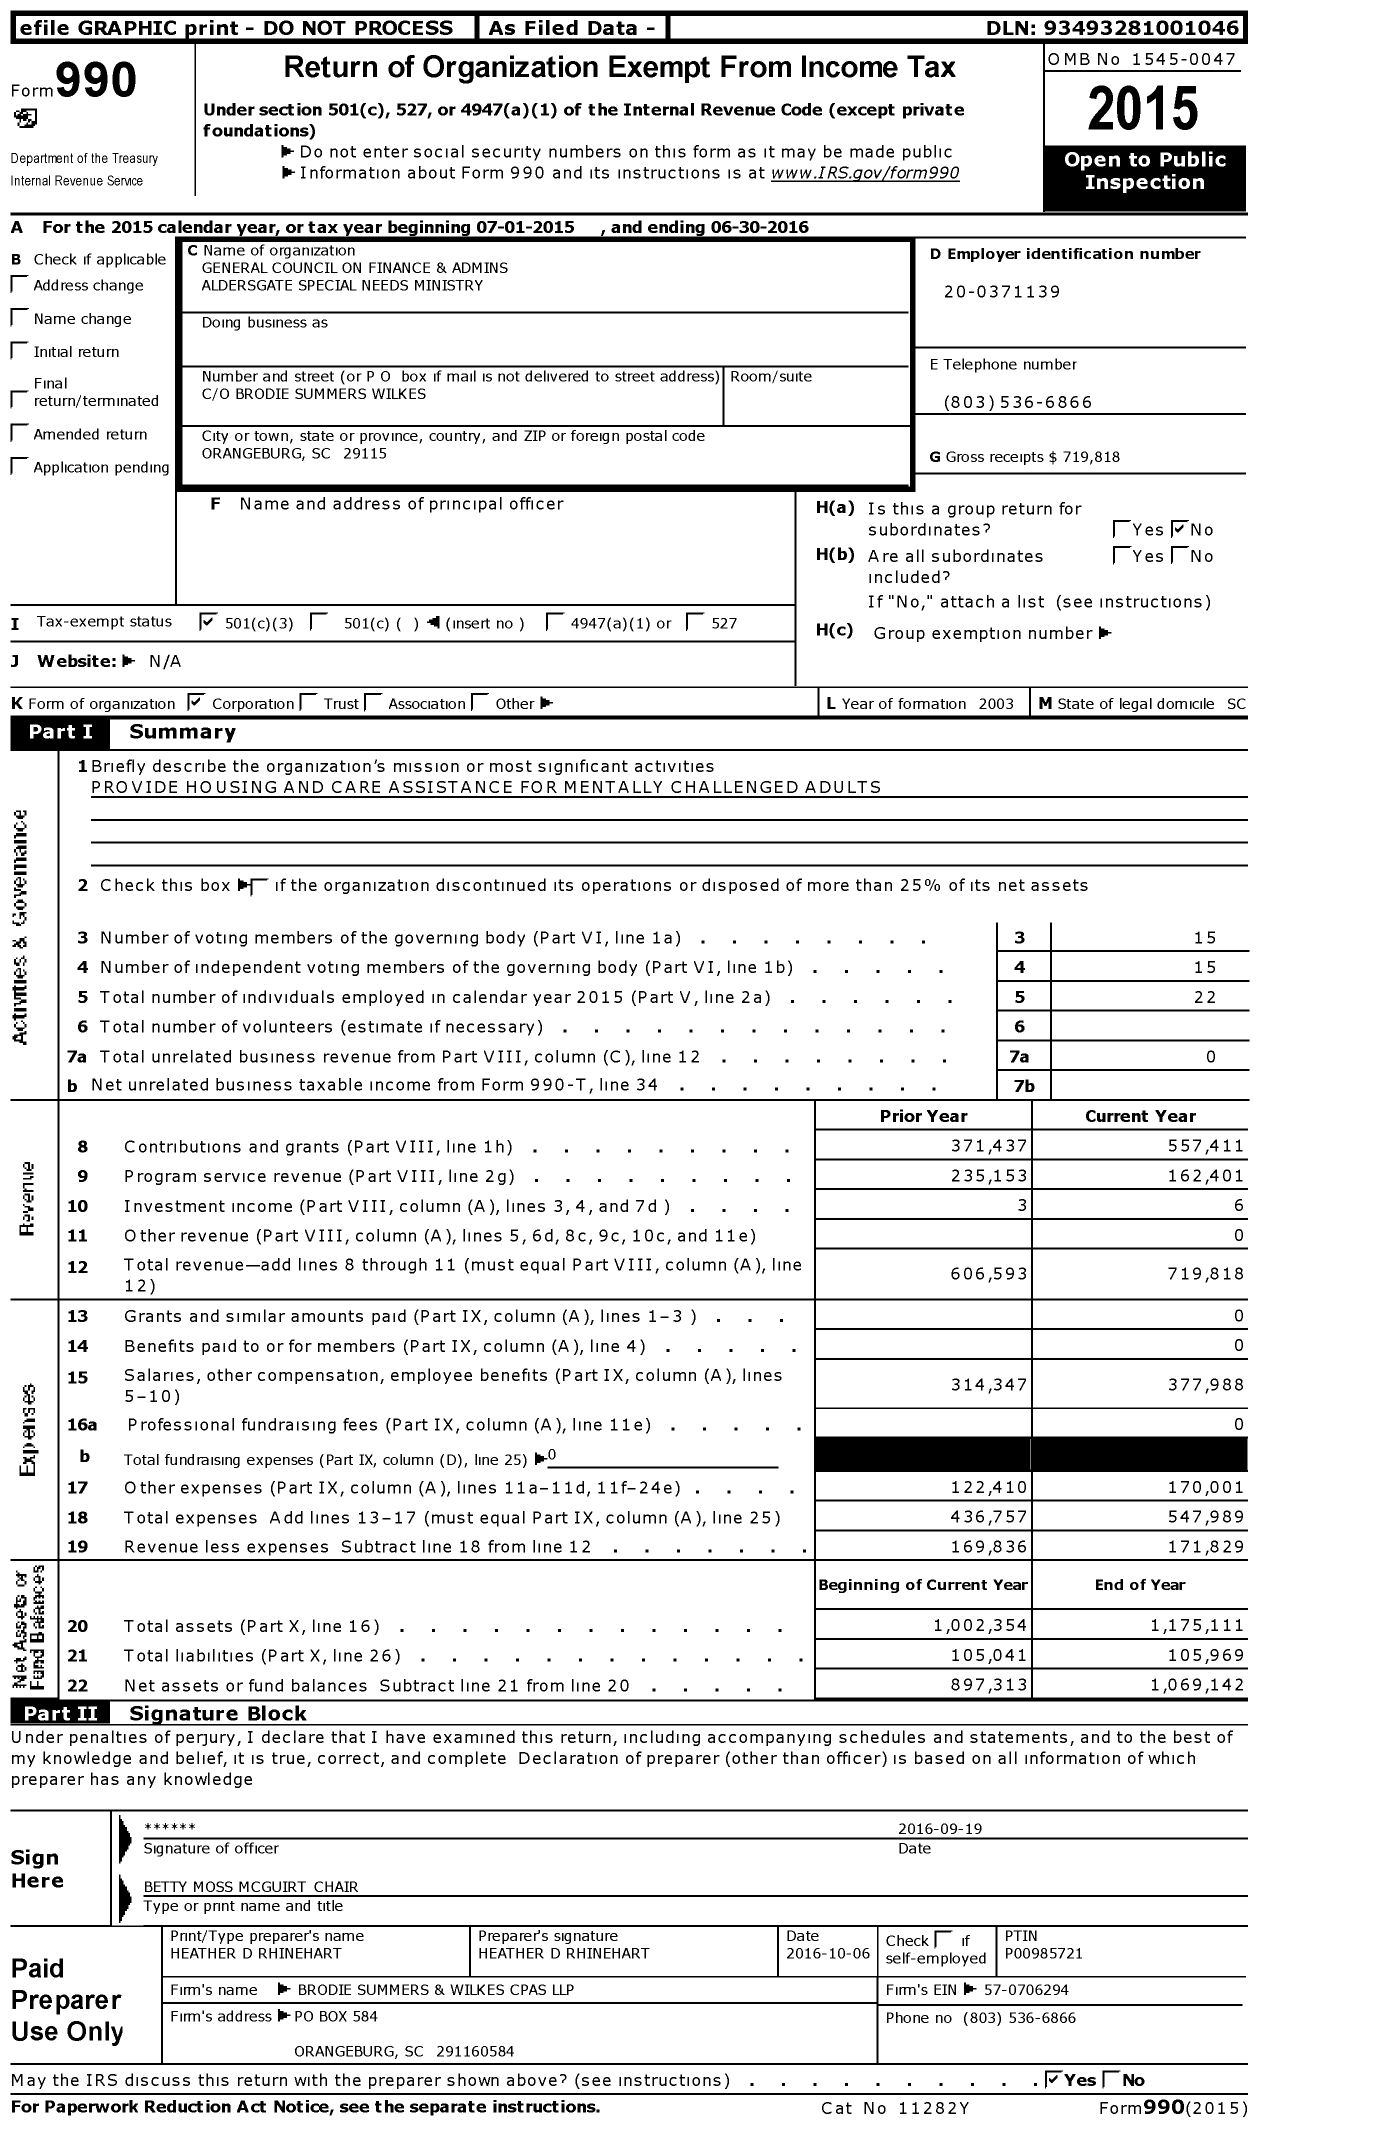 Image of first page of 2015 Form 990 for General Council on Finance and Admins Aldersgate Special Needs Ministry